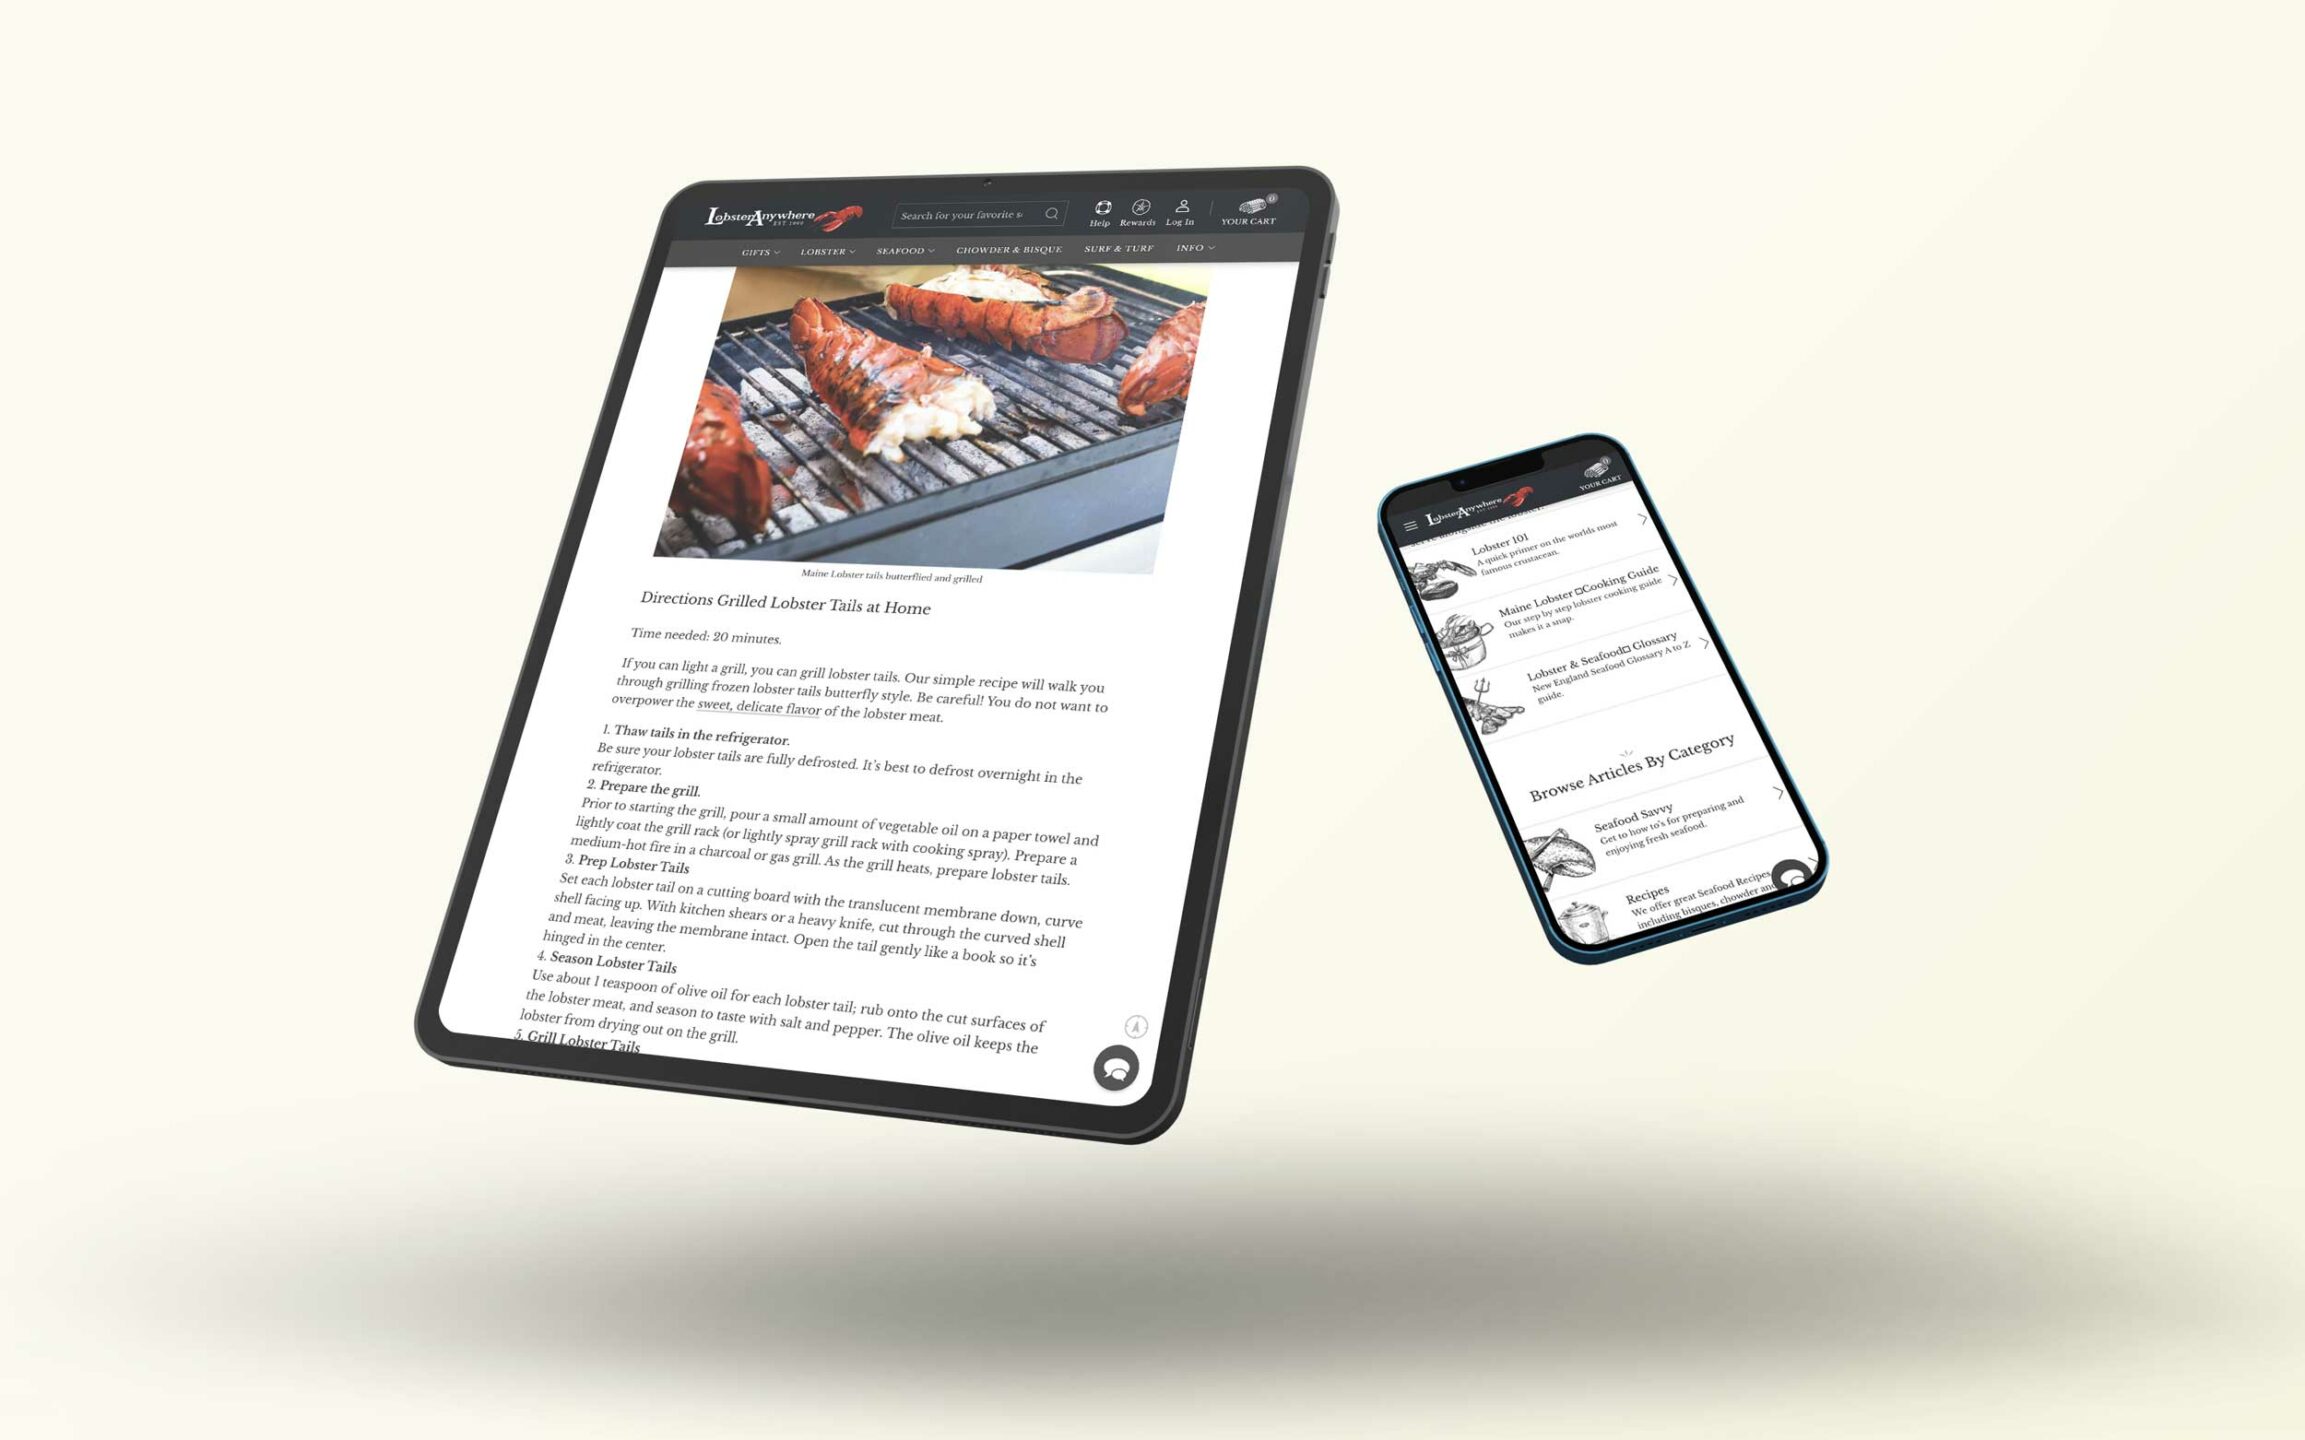 Pages from the Lobster Anywhere website being viewed on an iPad and an iPhone